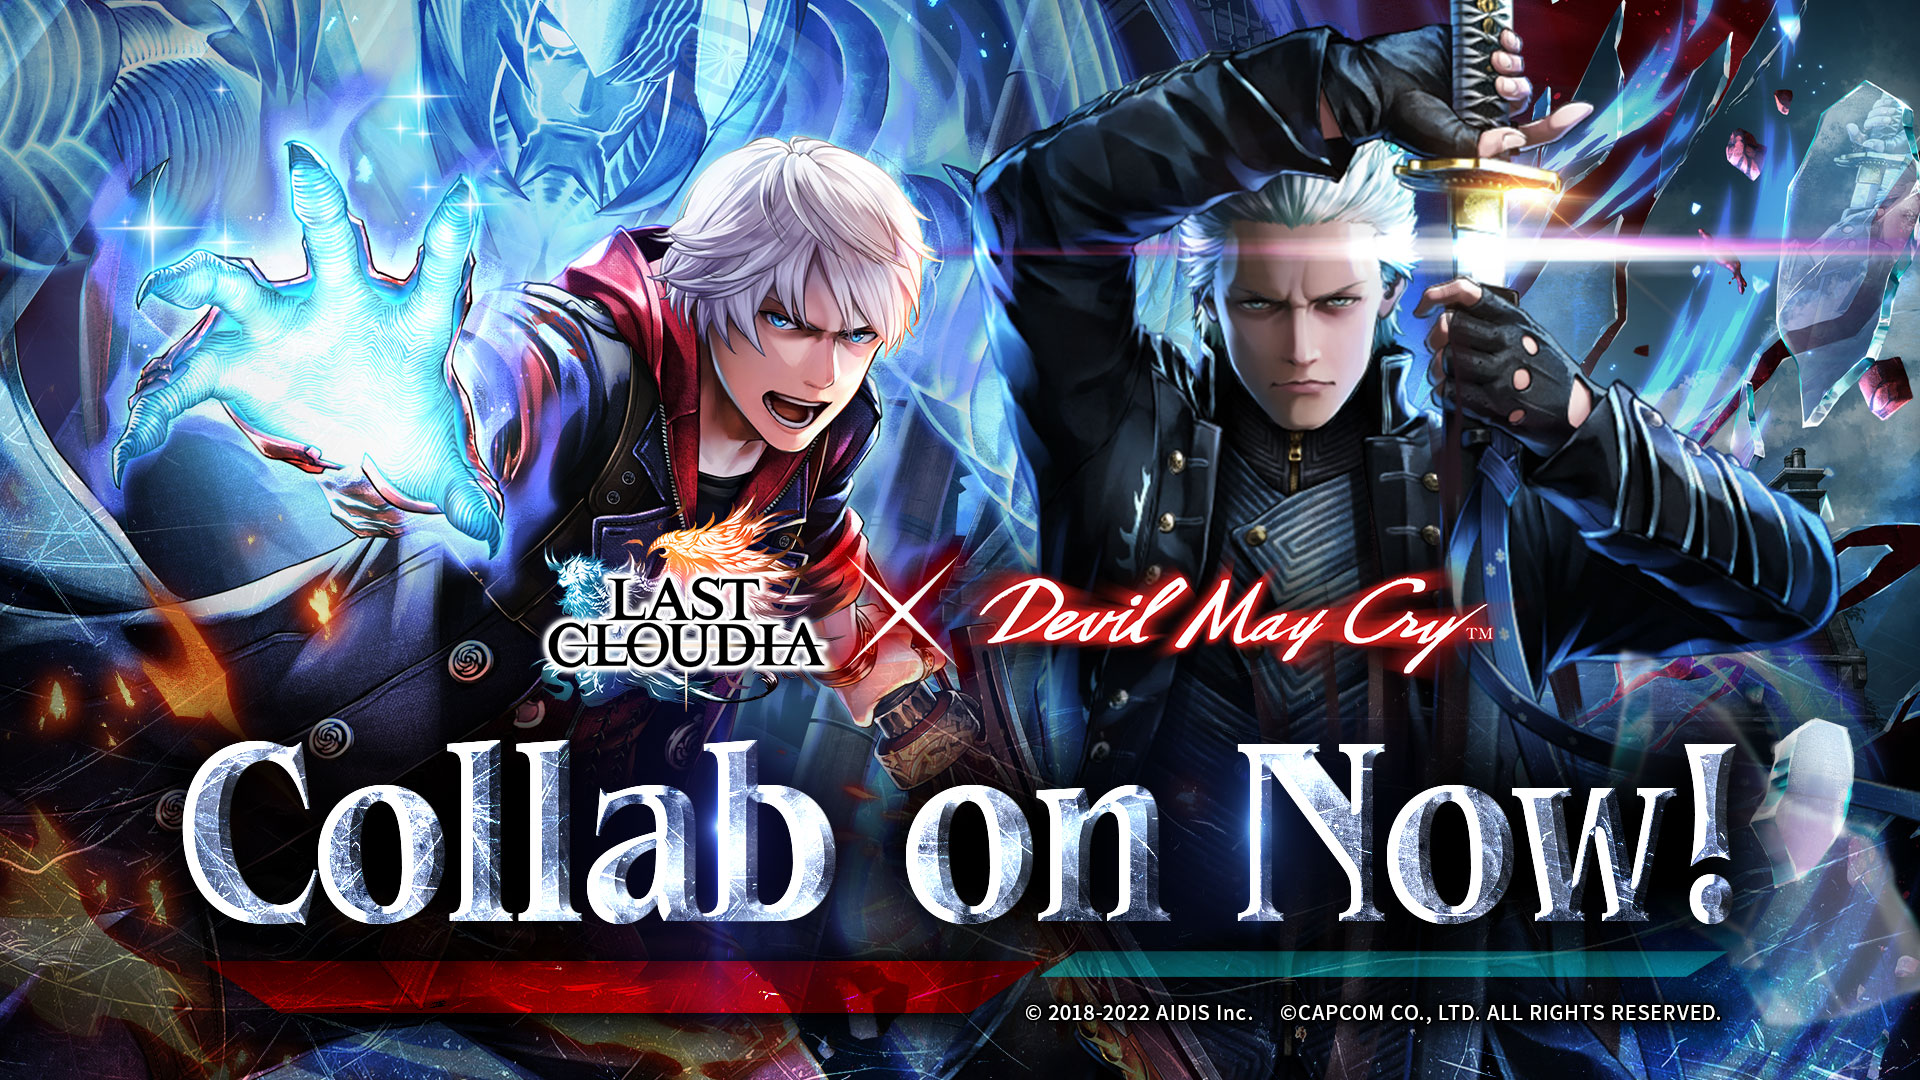 Devil May Cry mobile game releases on iOS and Android